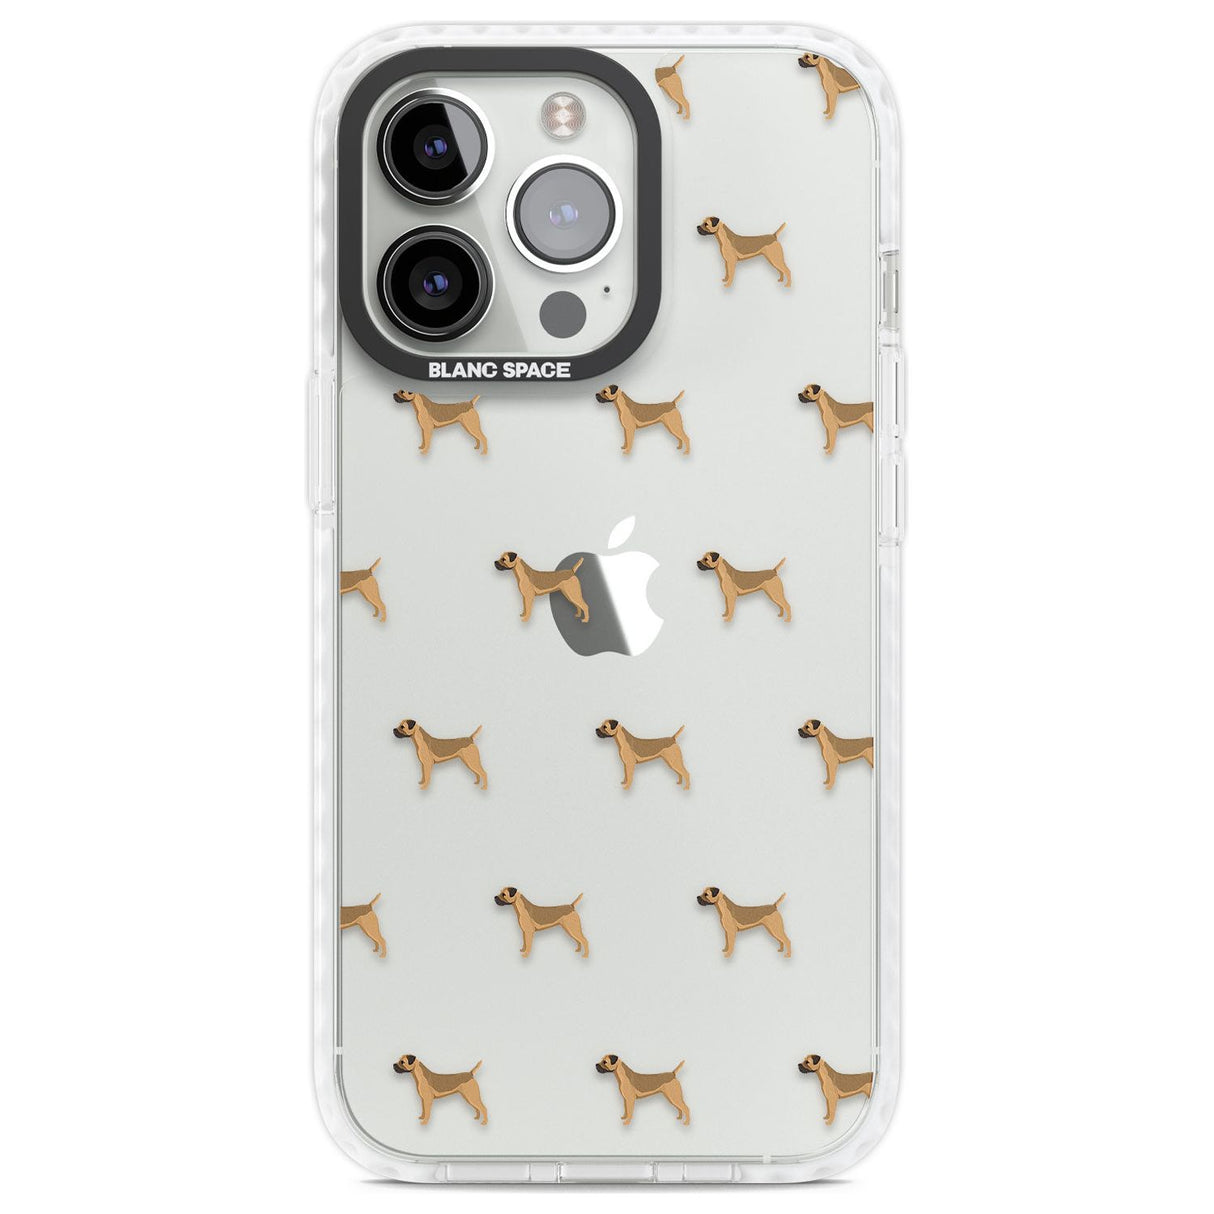 Border Terrier Dog Pattern Clear Phone Case iPhone 13 Pro / Impact Case,iPhone 14 Pro / Impact Case,iPhone 15 Pro Max / Impact Case,iPhone 15 Pro / Impact Case Blanc Space